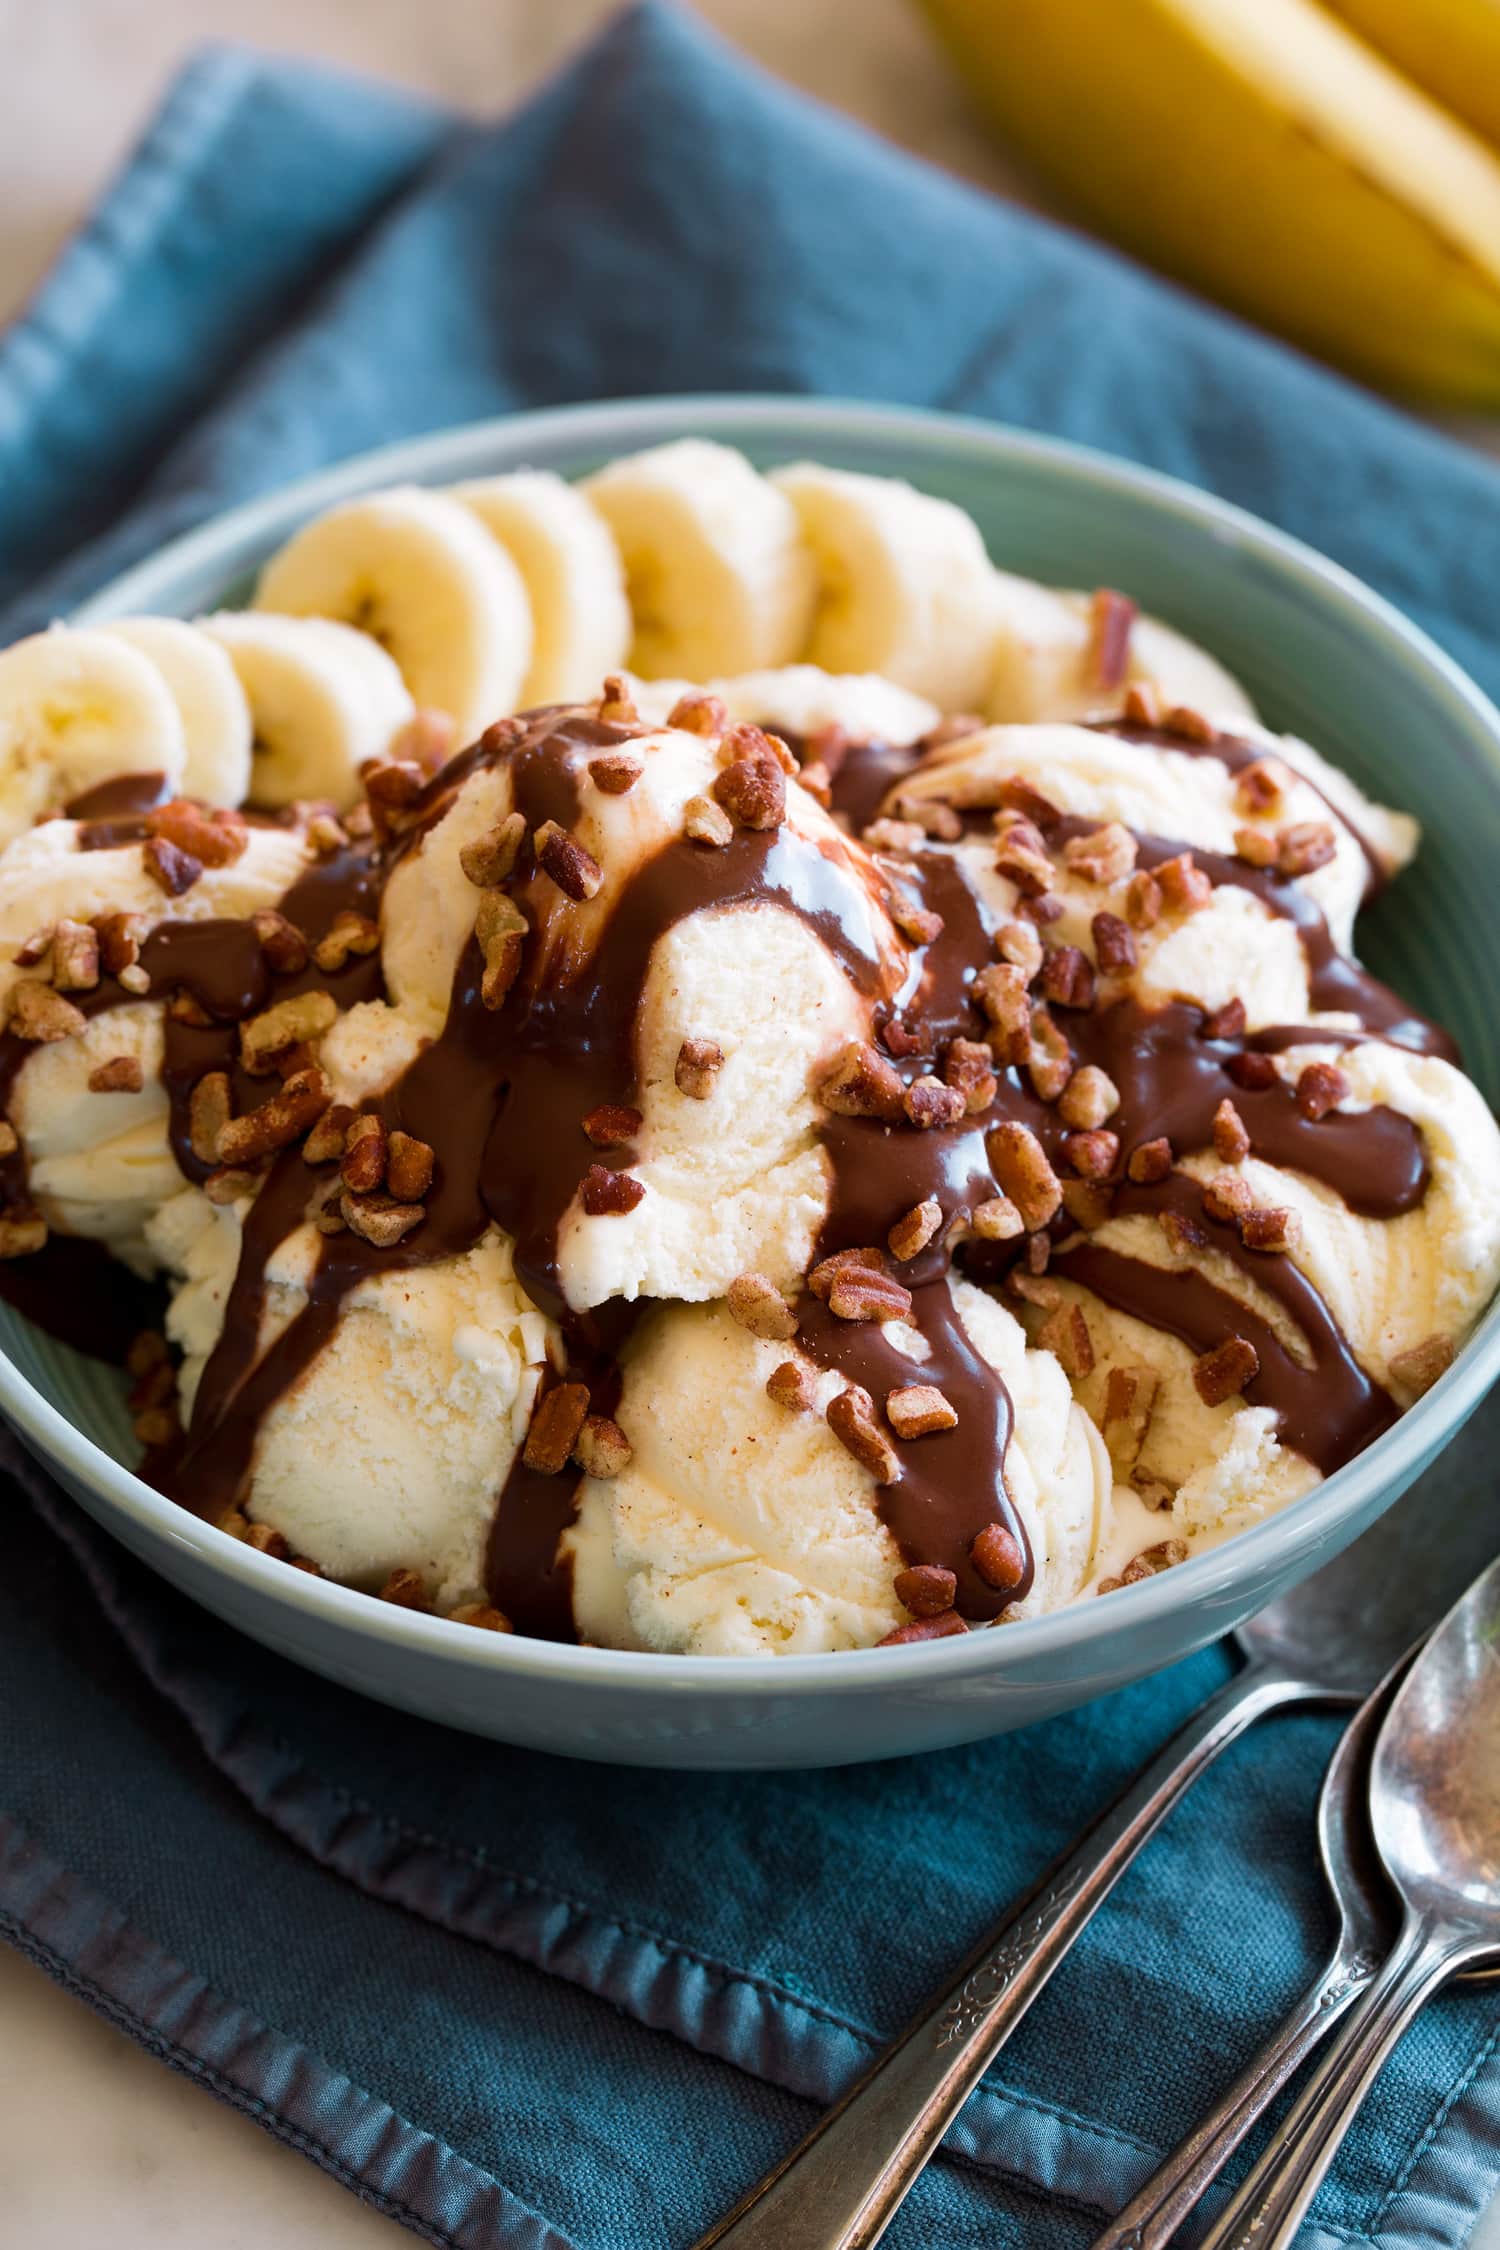 Hot fudge sauce drizzled over vanilla ice cream with banana slices and chopped pecans.